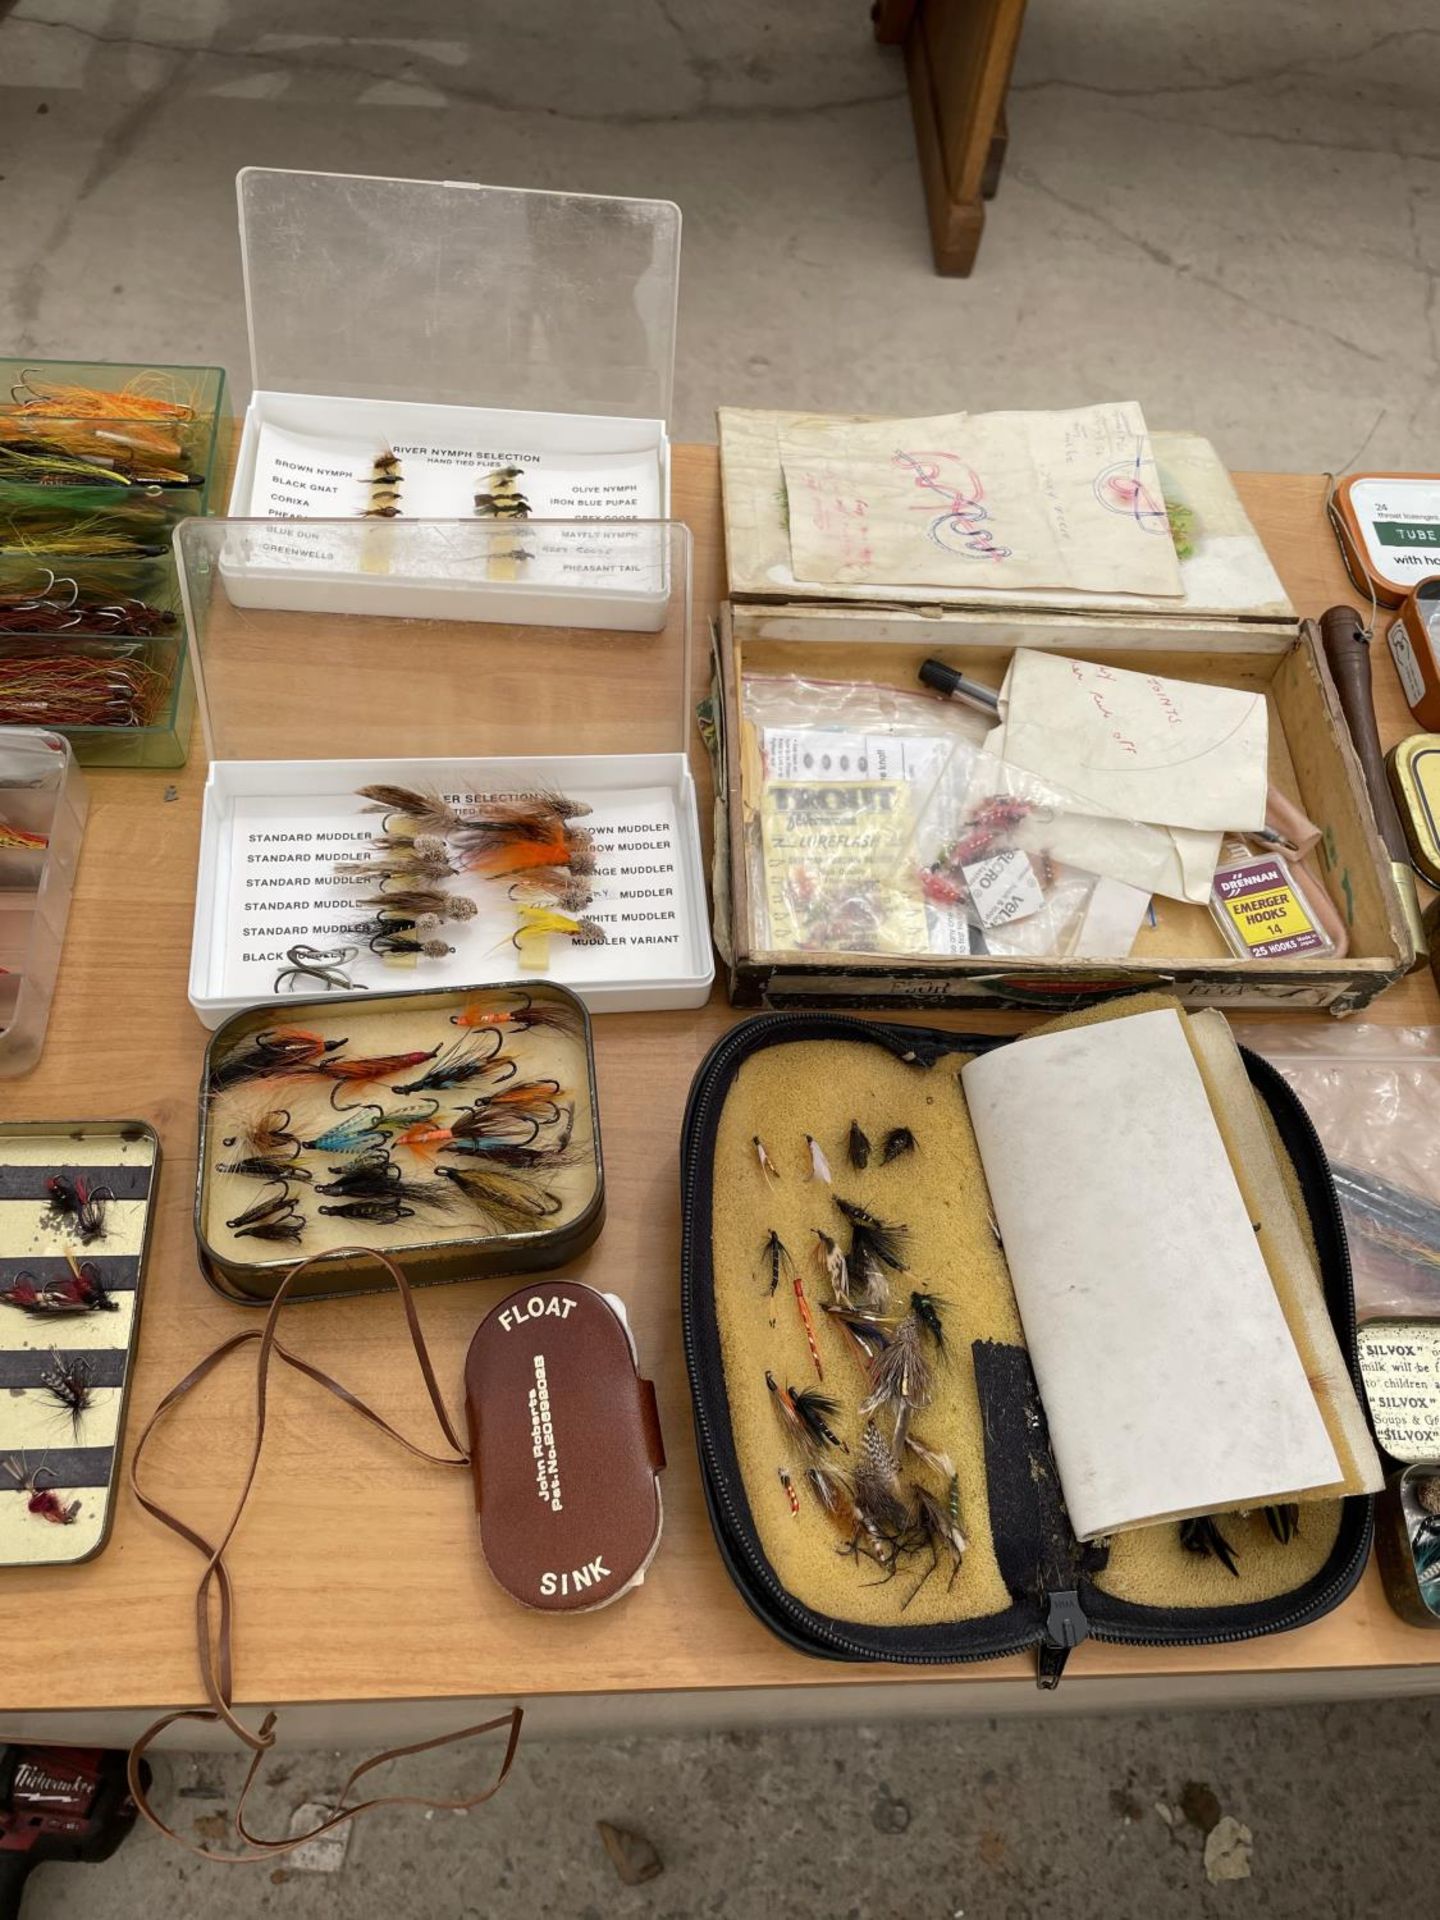 A LARGE COLLECTION OF FISHING FLIES, 3 WALLETS, 2 BOXES OF MCHARDYS OF CARLISLE, A PRIEST AND TUBE - Image 4 of 5